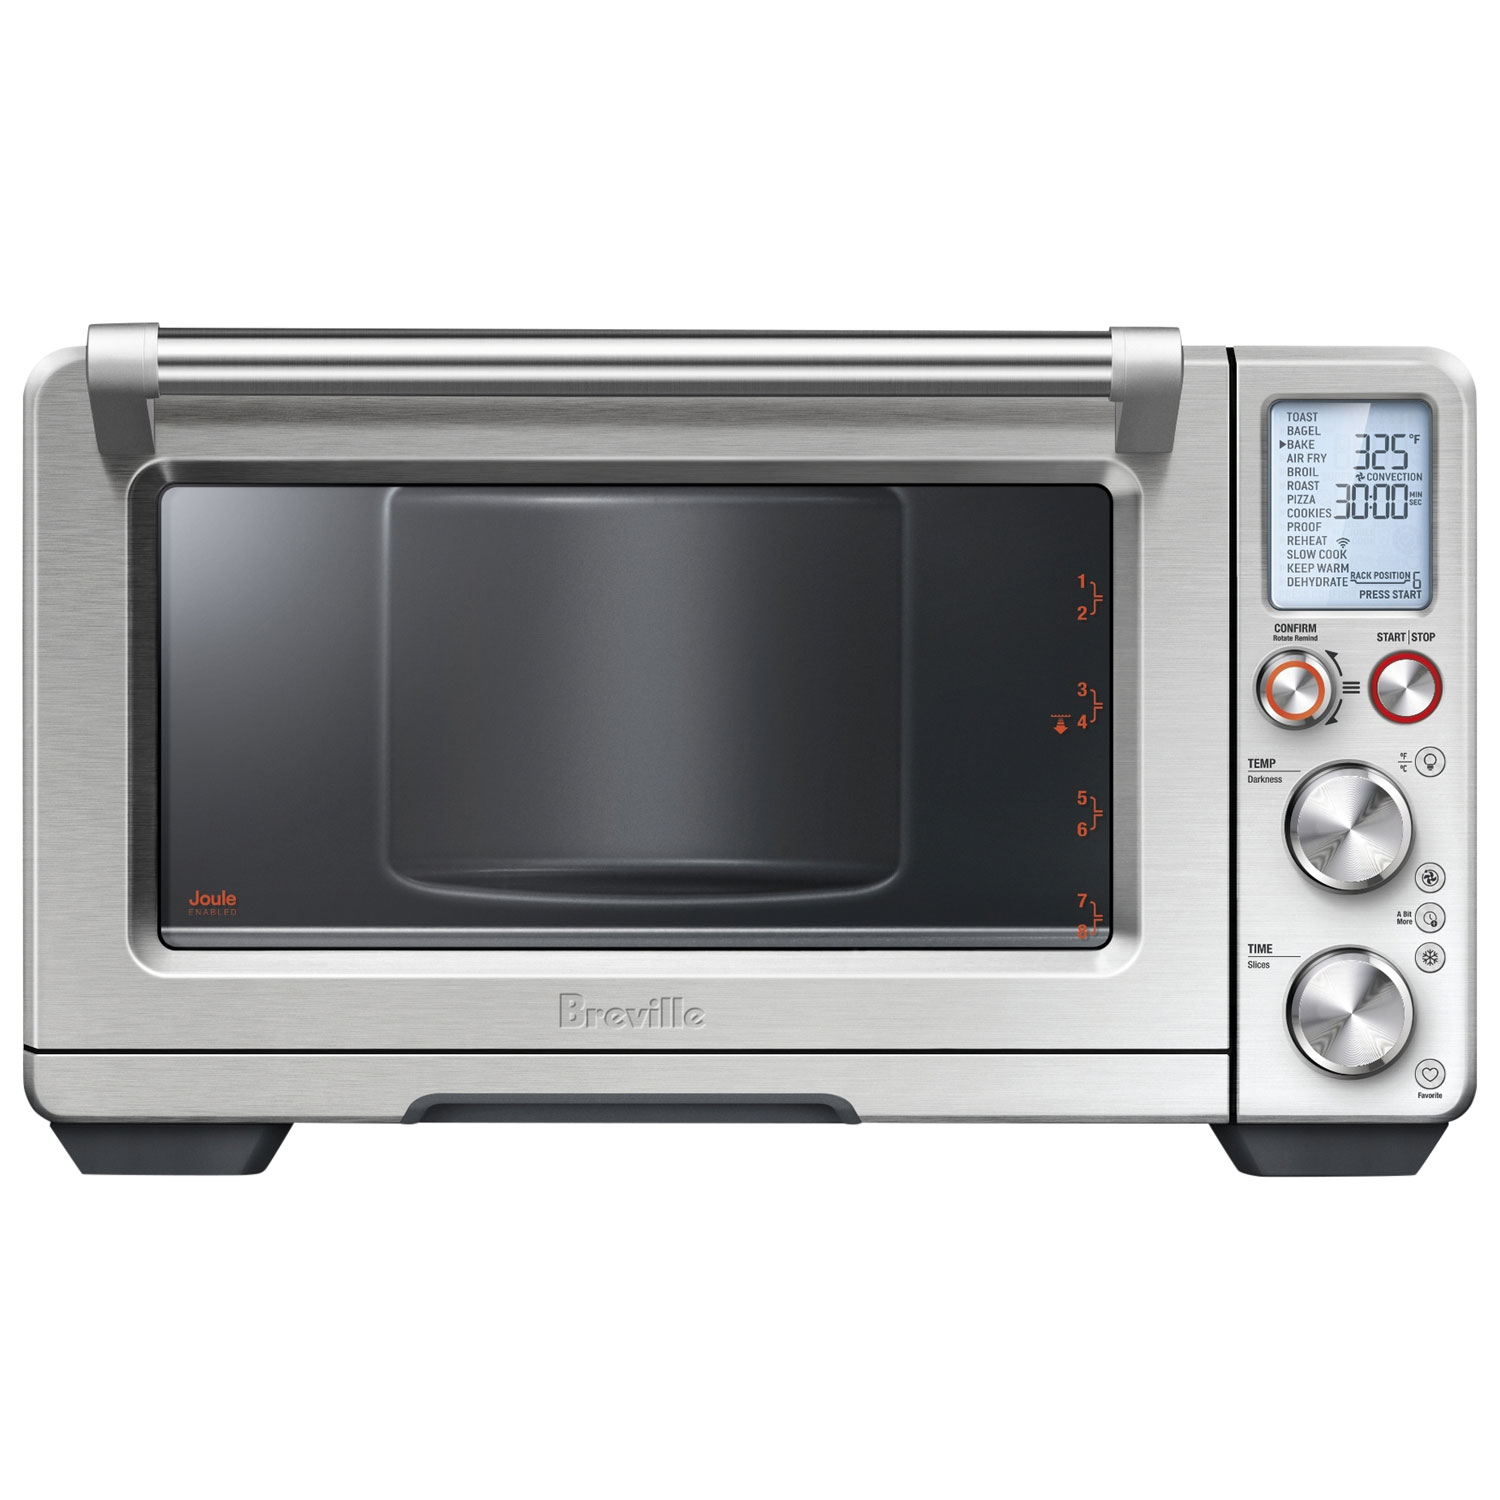 Breville Convection Toaster Oven with Joule Autopilot - 0.9 Cu. Ft./25.5L - Brushed Stainless Steel